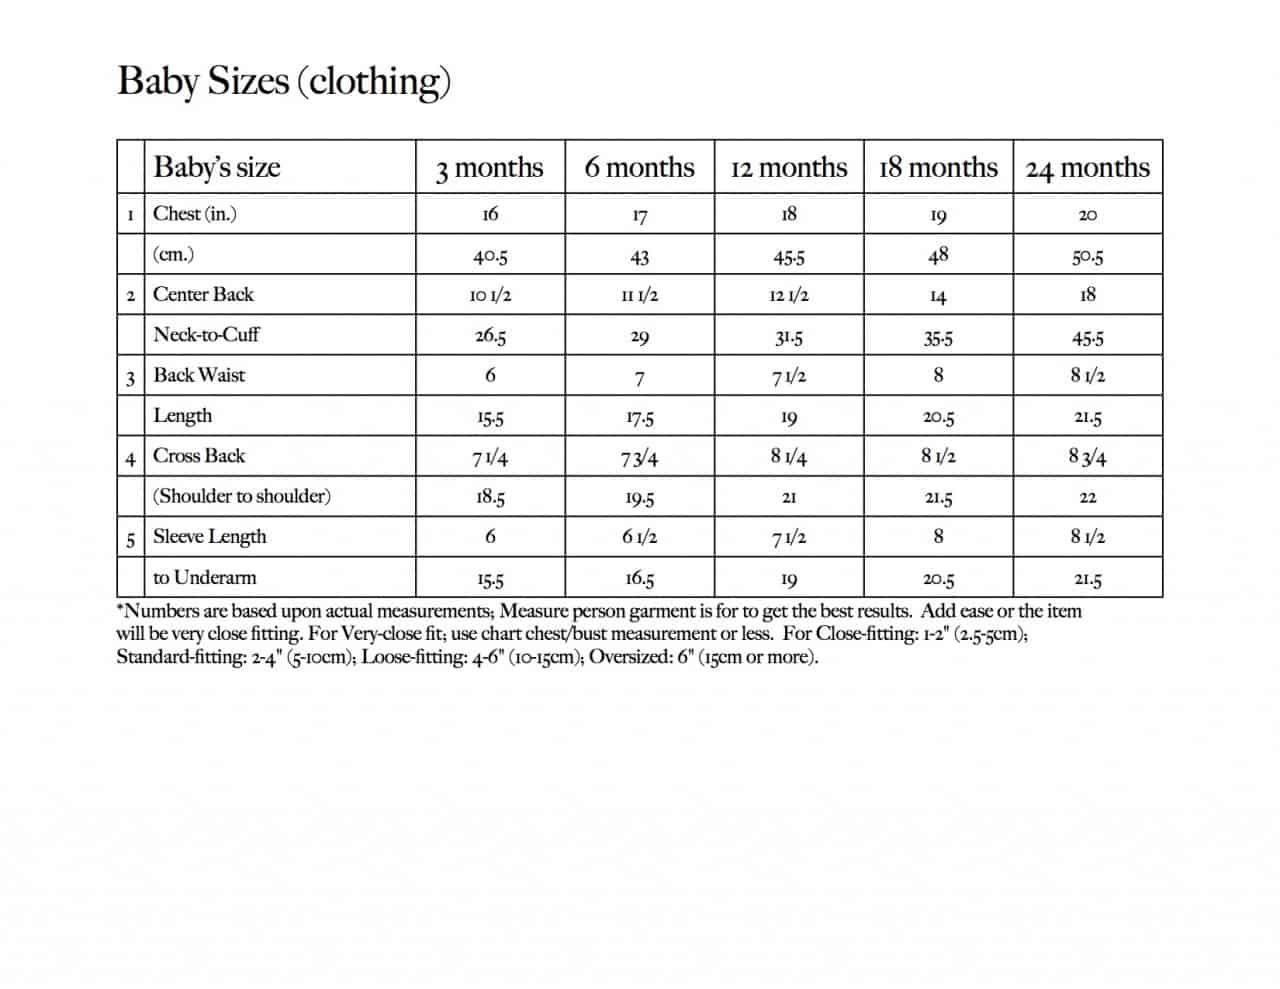 Belle Baby Size Chart